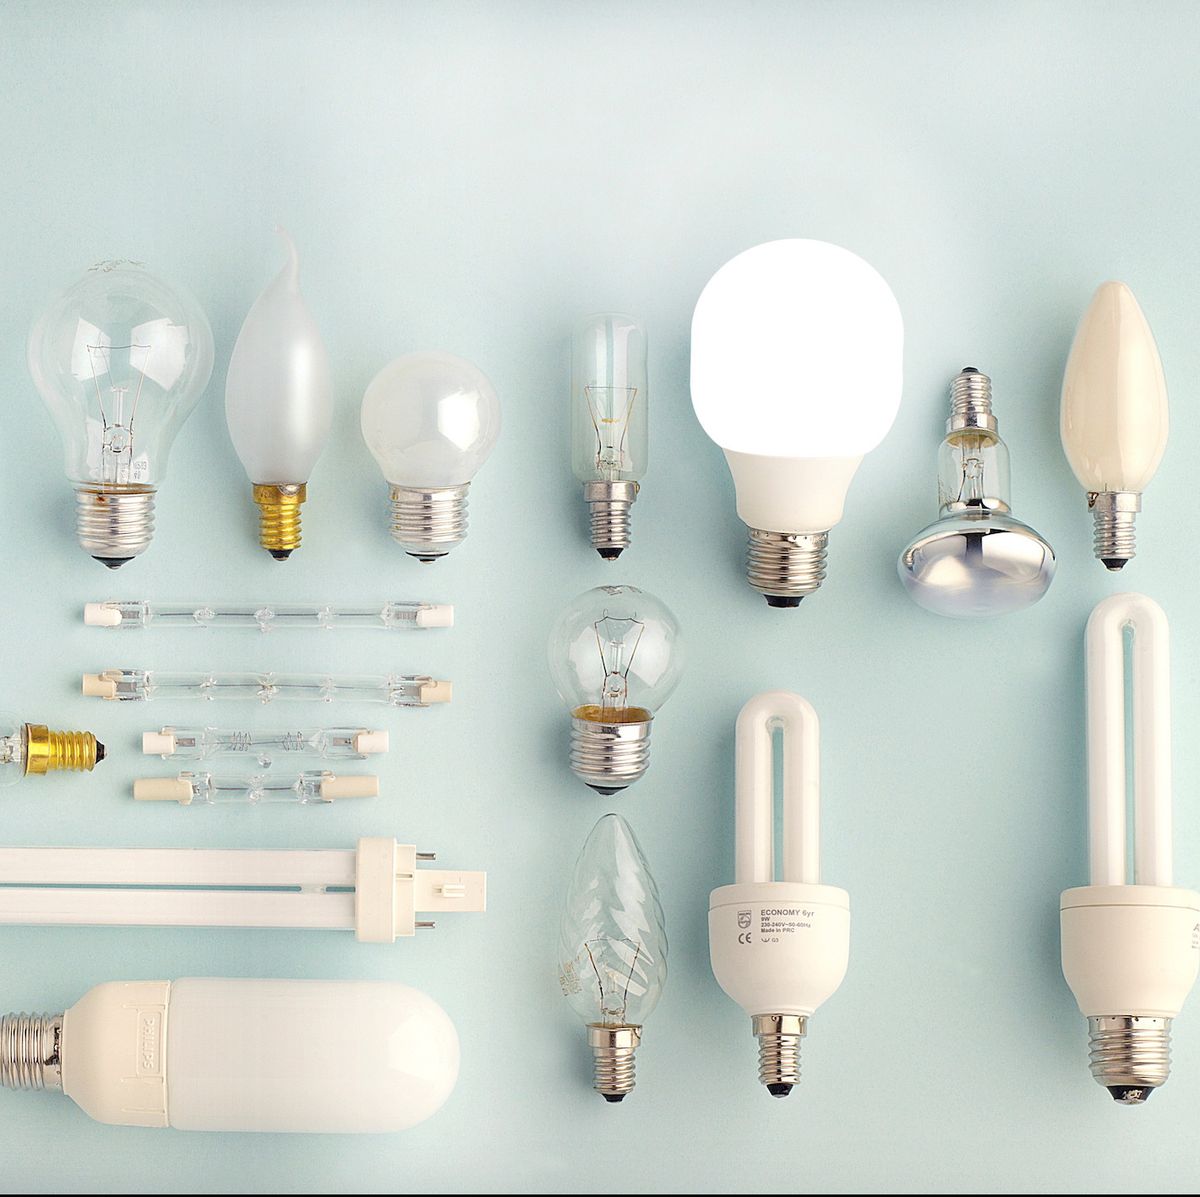 Start Your CFL Bulb Assembling Business from Home with Minimal Investment. Earn Big!\